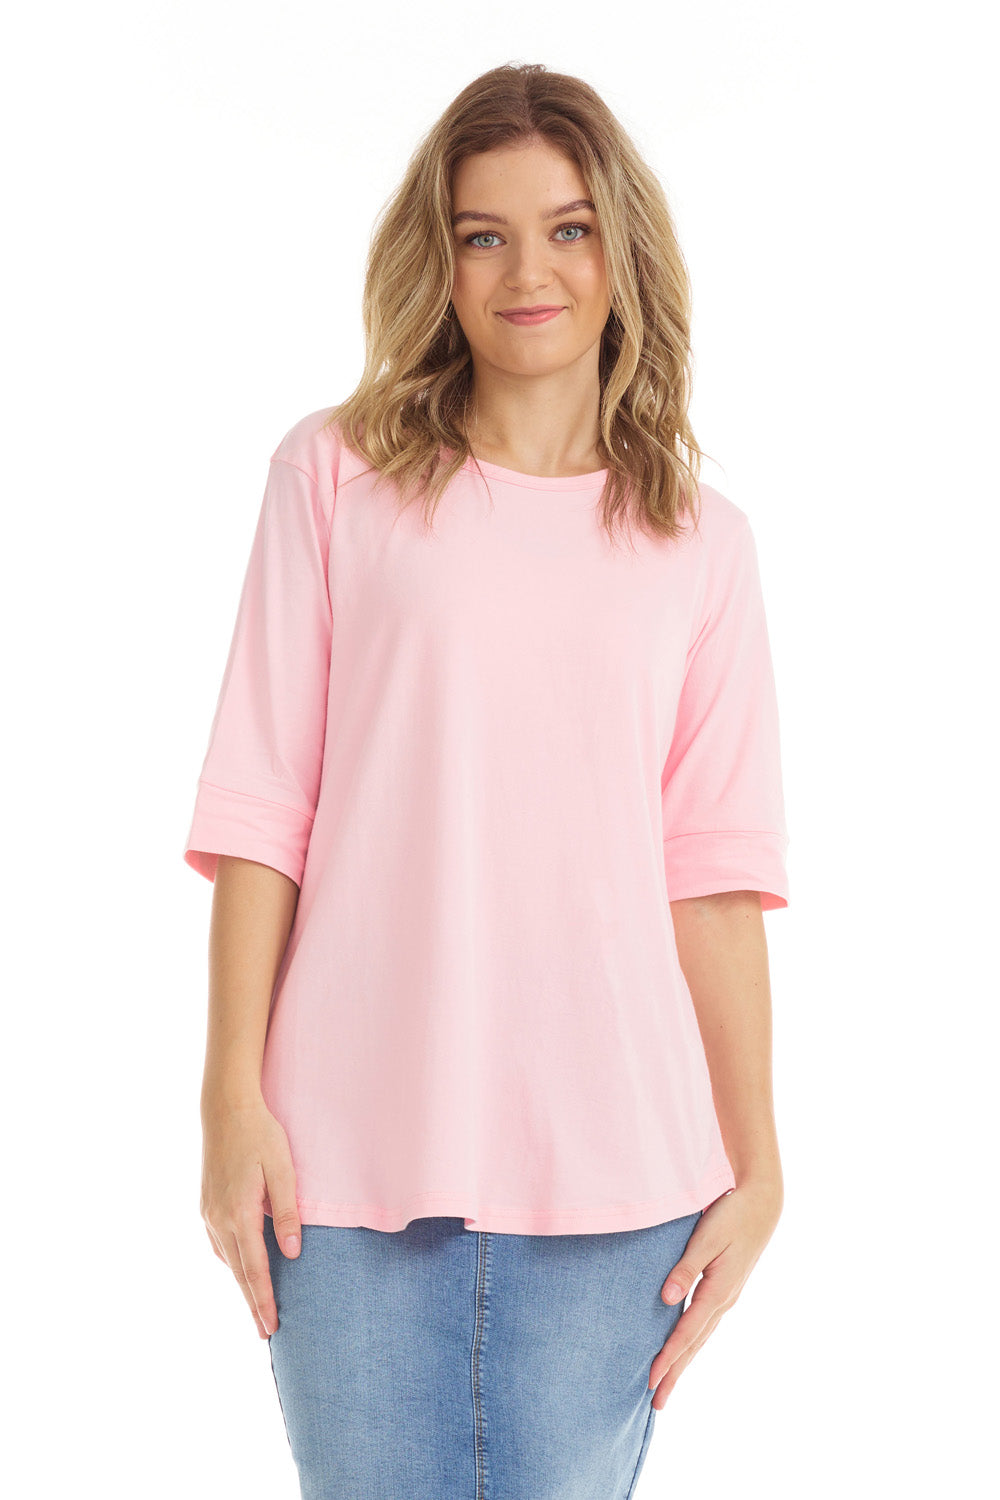 pastel pink elbow sleeve shirt with cuff sleeve